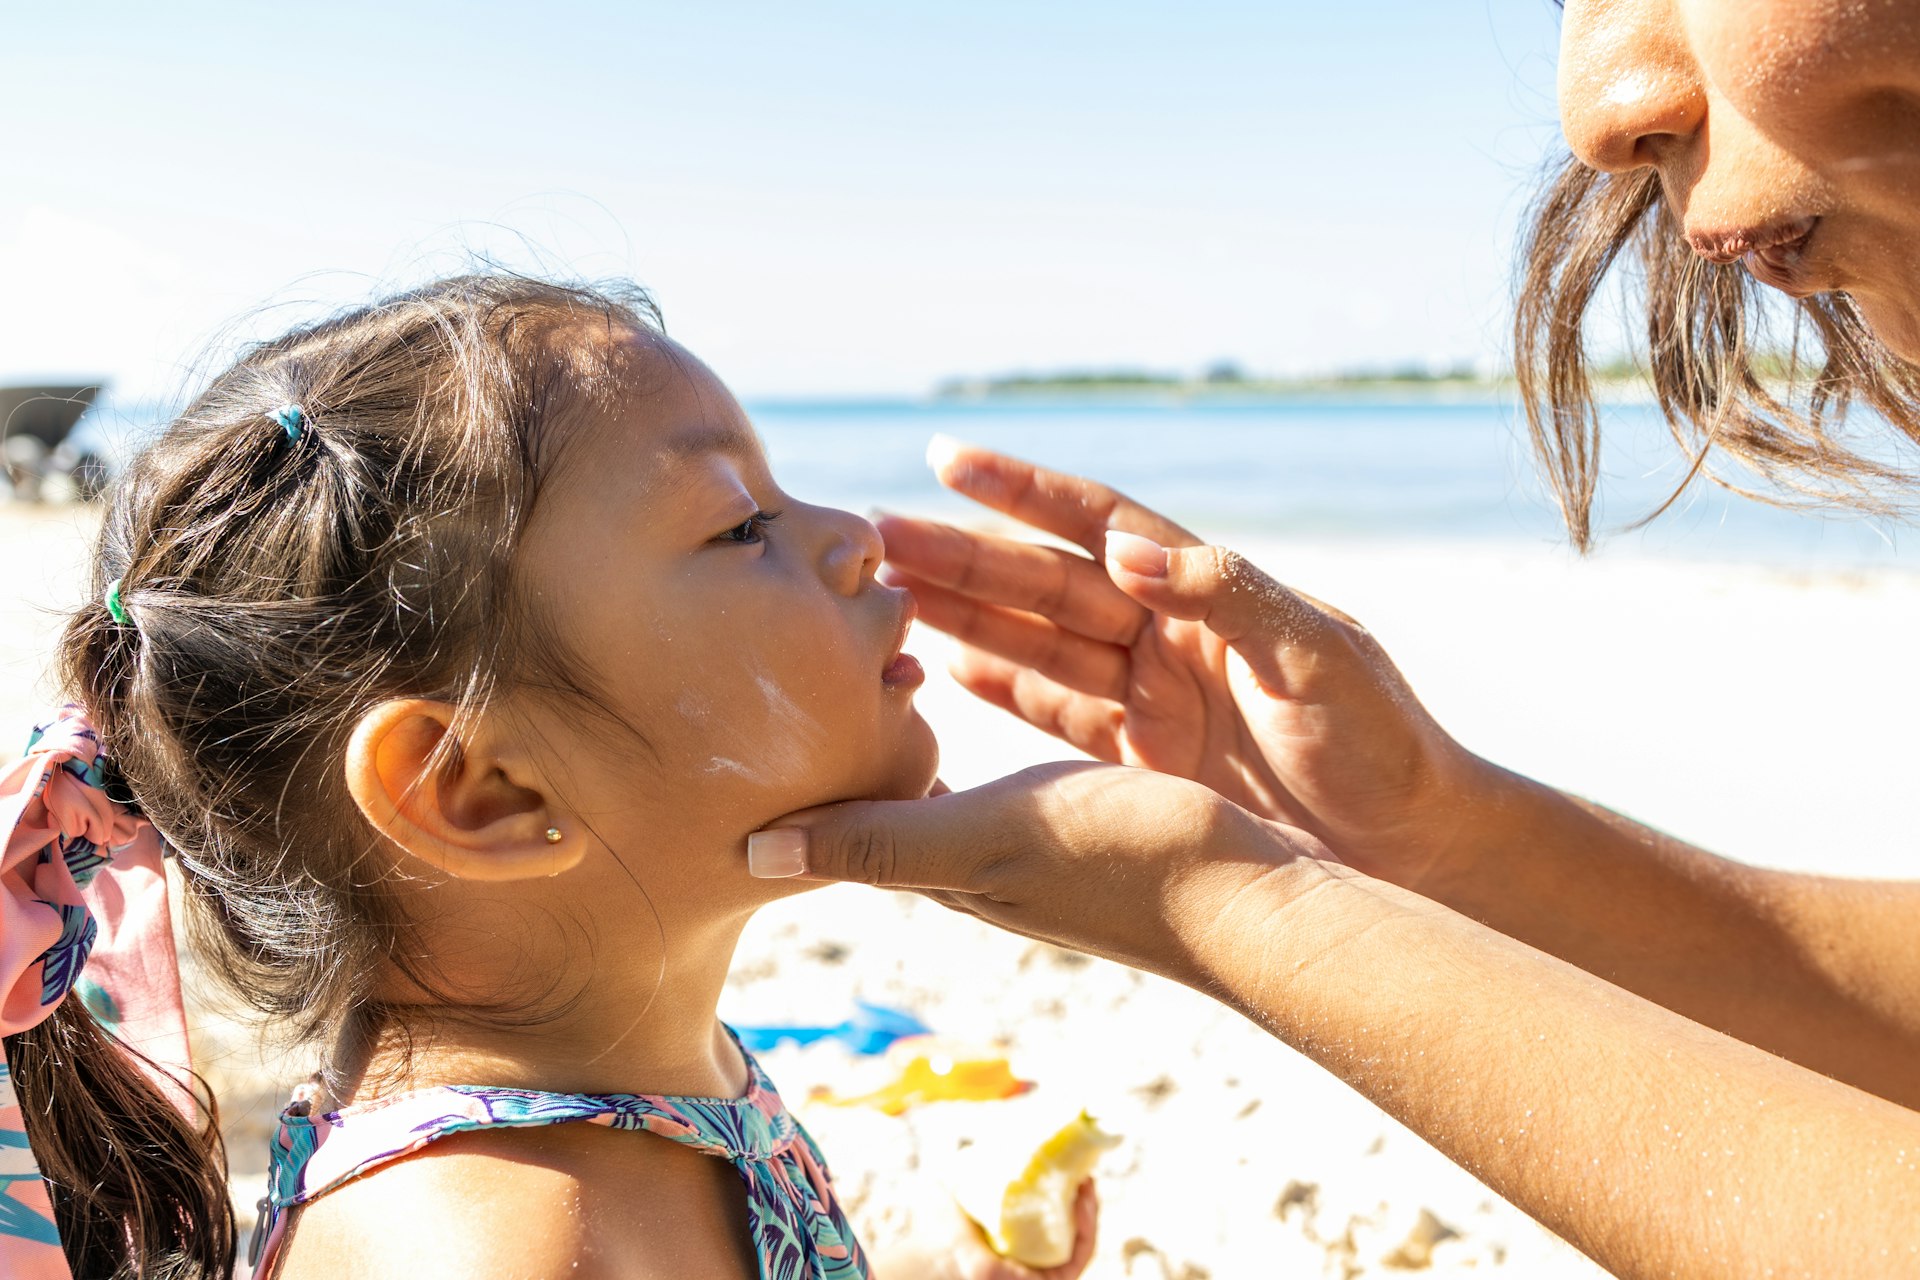 A mother puts sunscreen on her young daughter's face